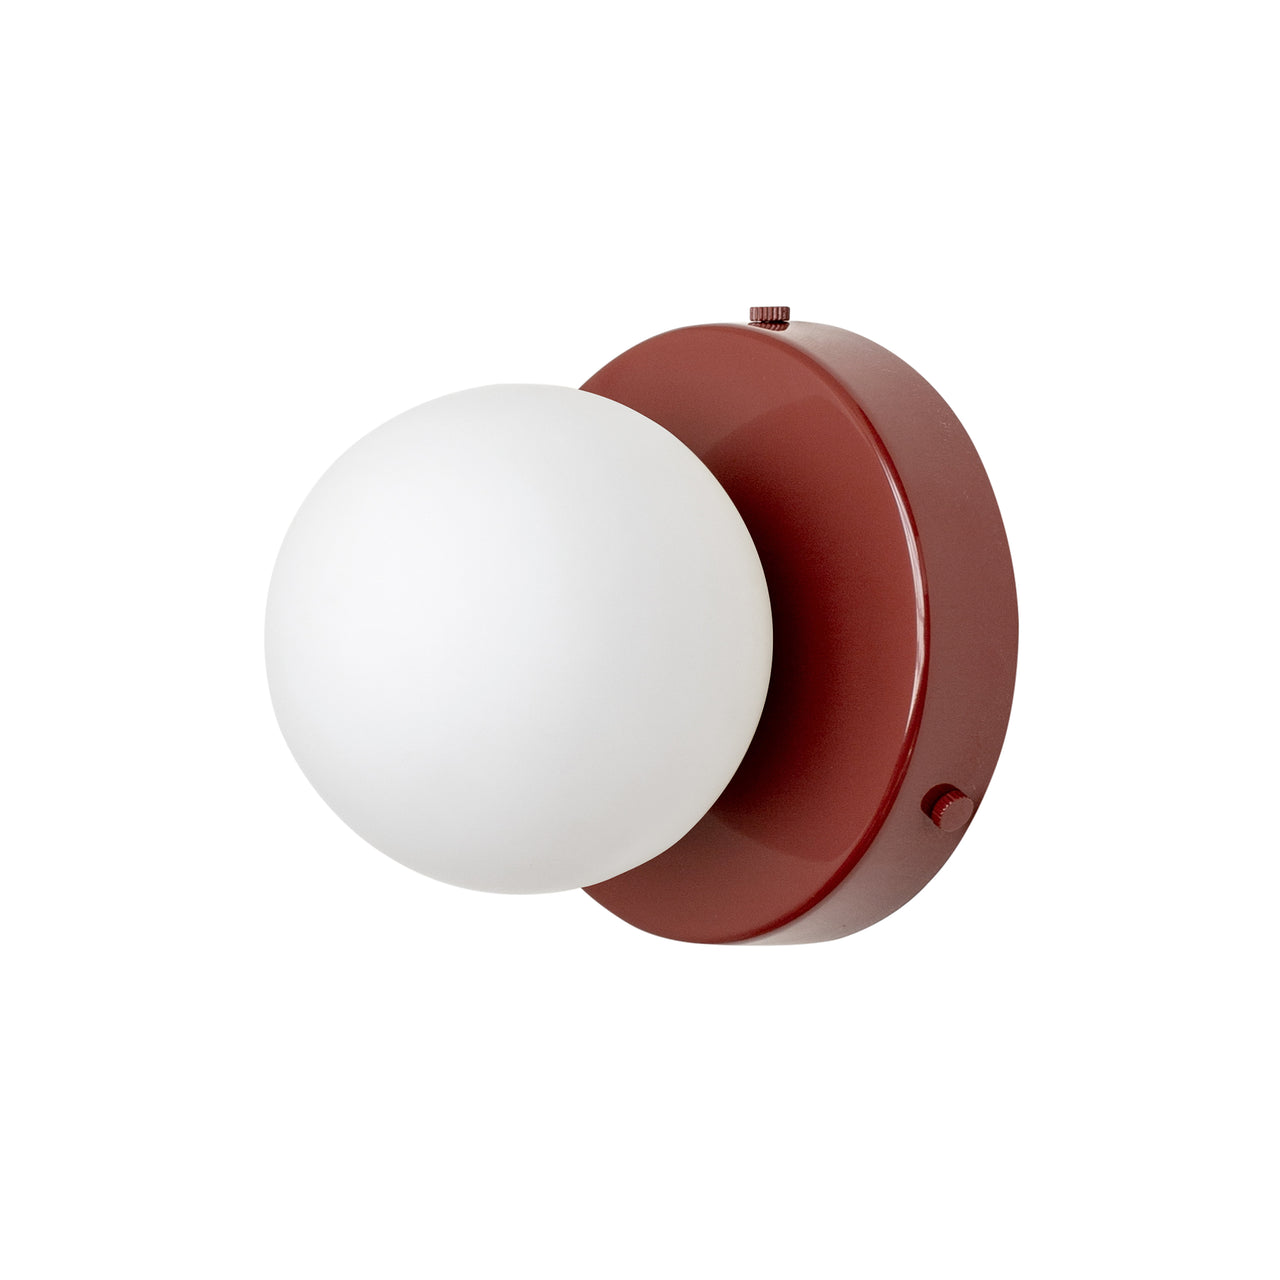 Orb 4 Surface Mount: Oxide Red + Hardwire